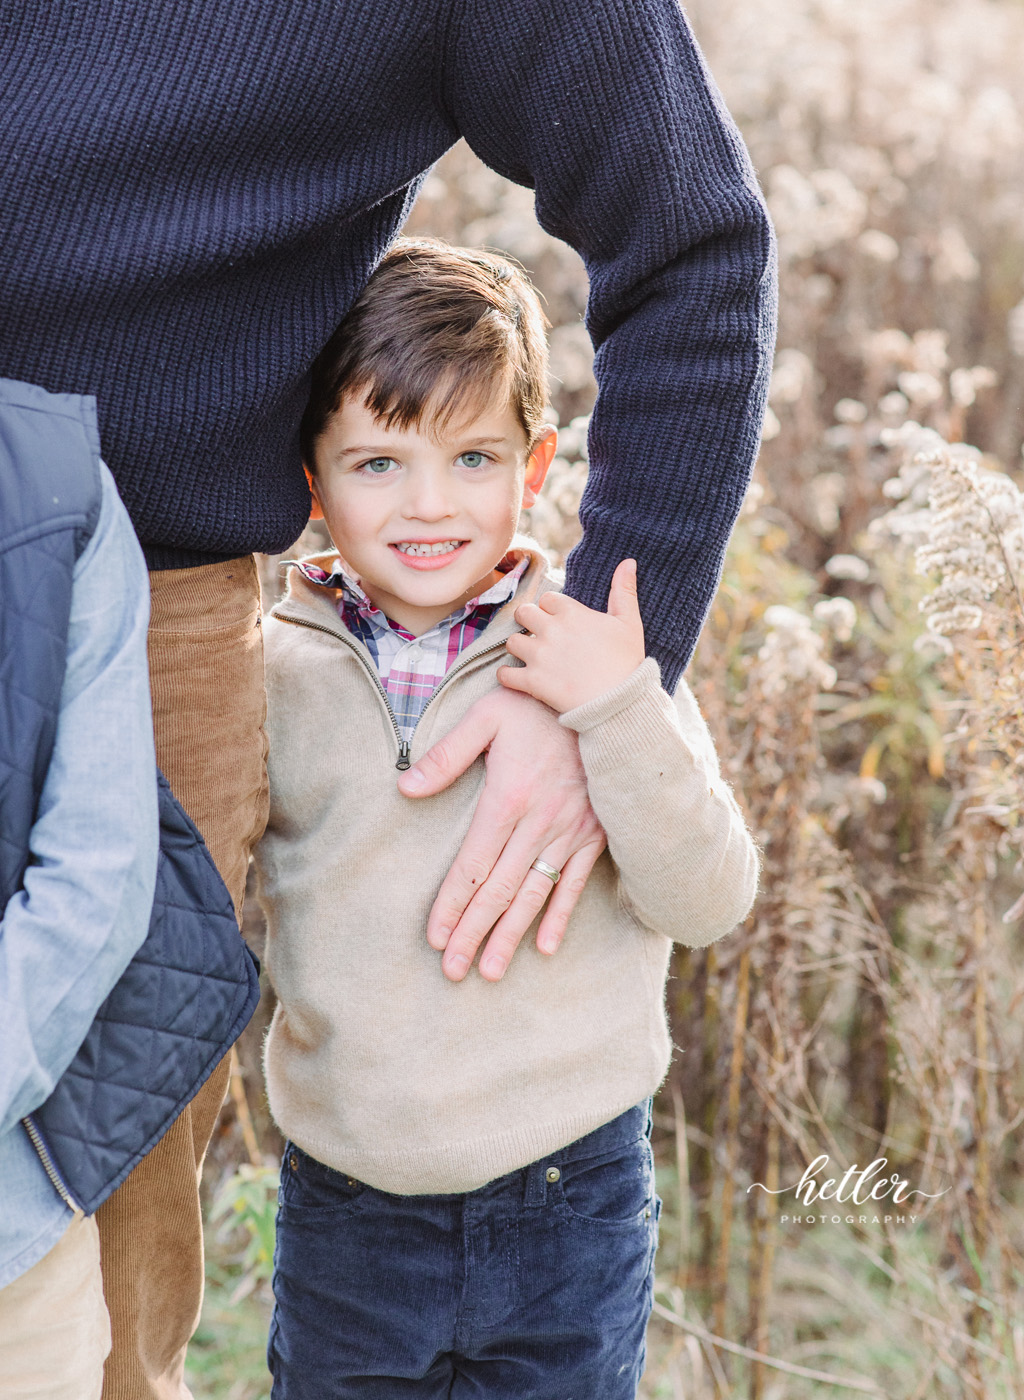 Fall family photos in Ada Michigan at Roselle Park